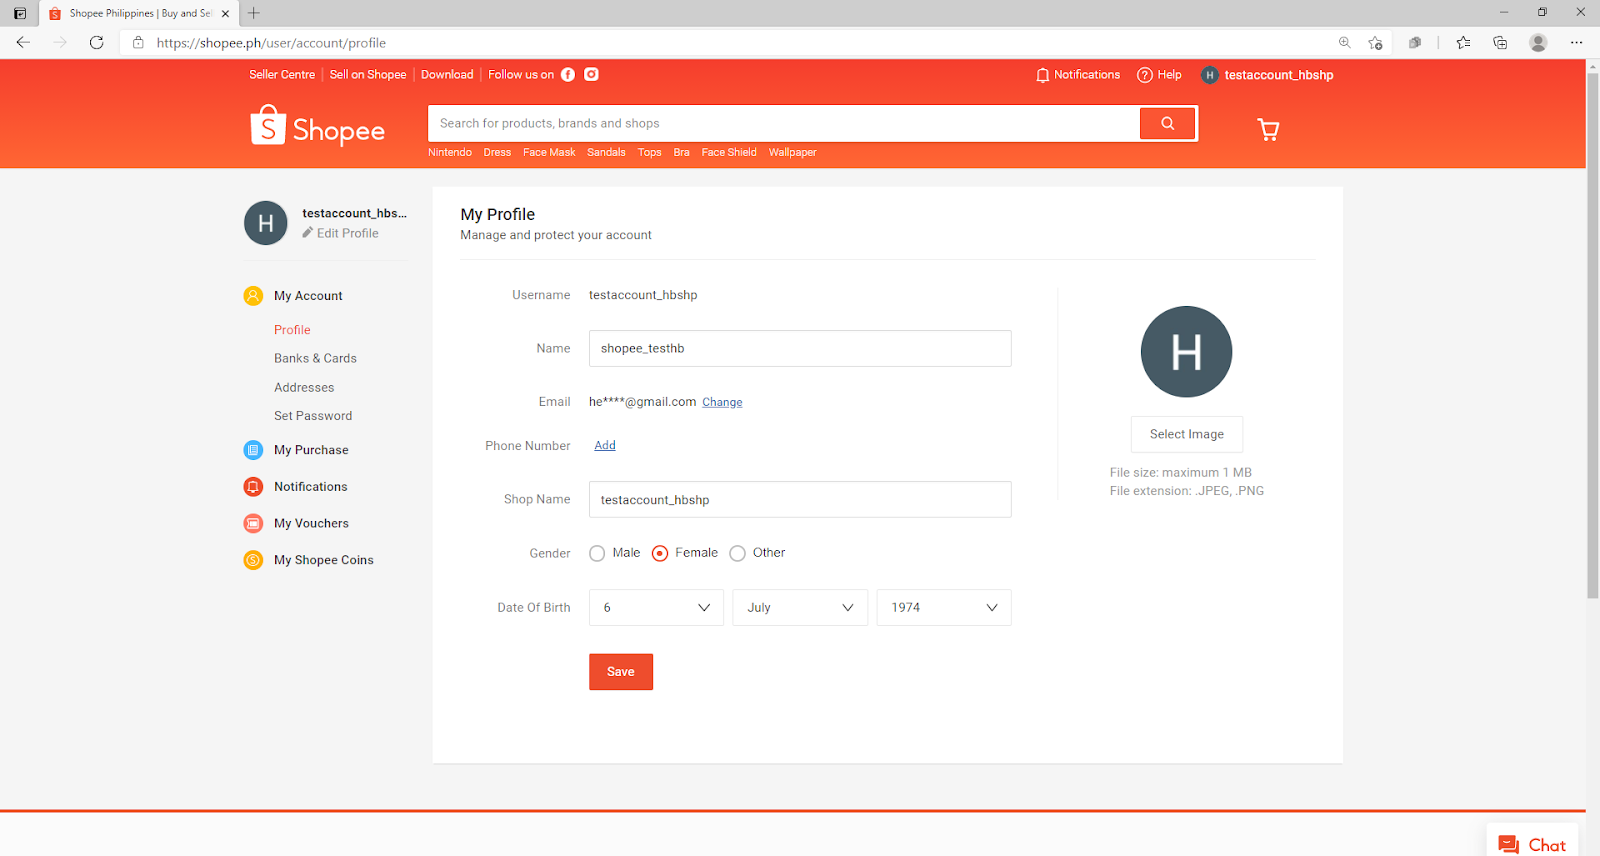 How to start selling on Shopee